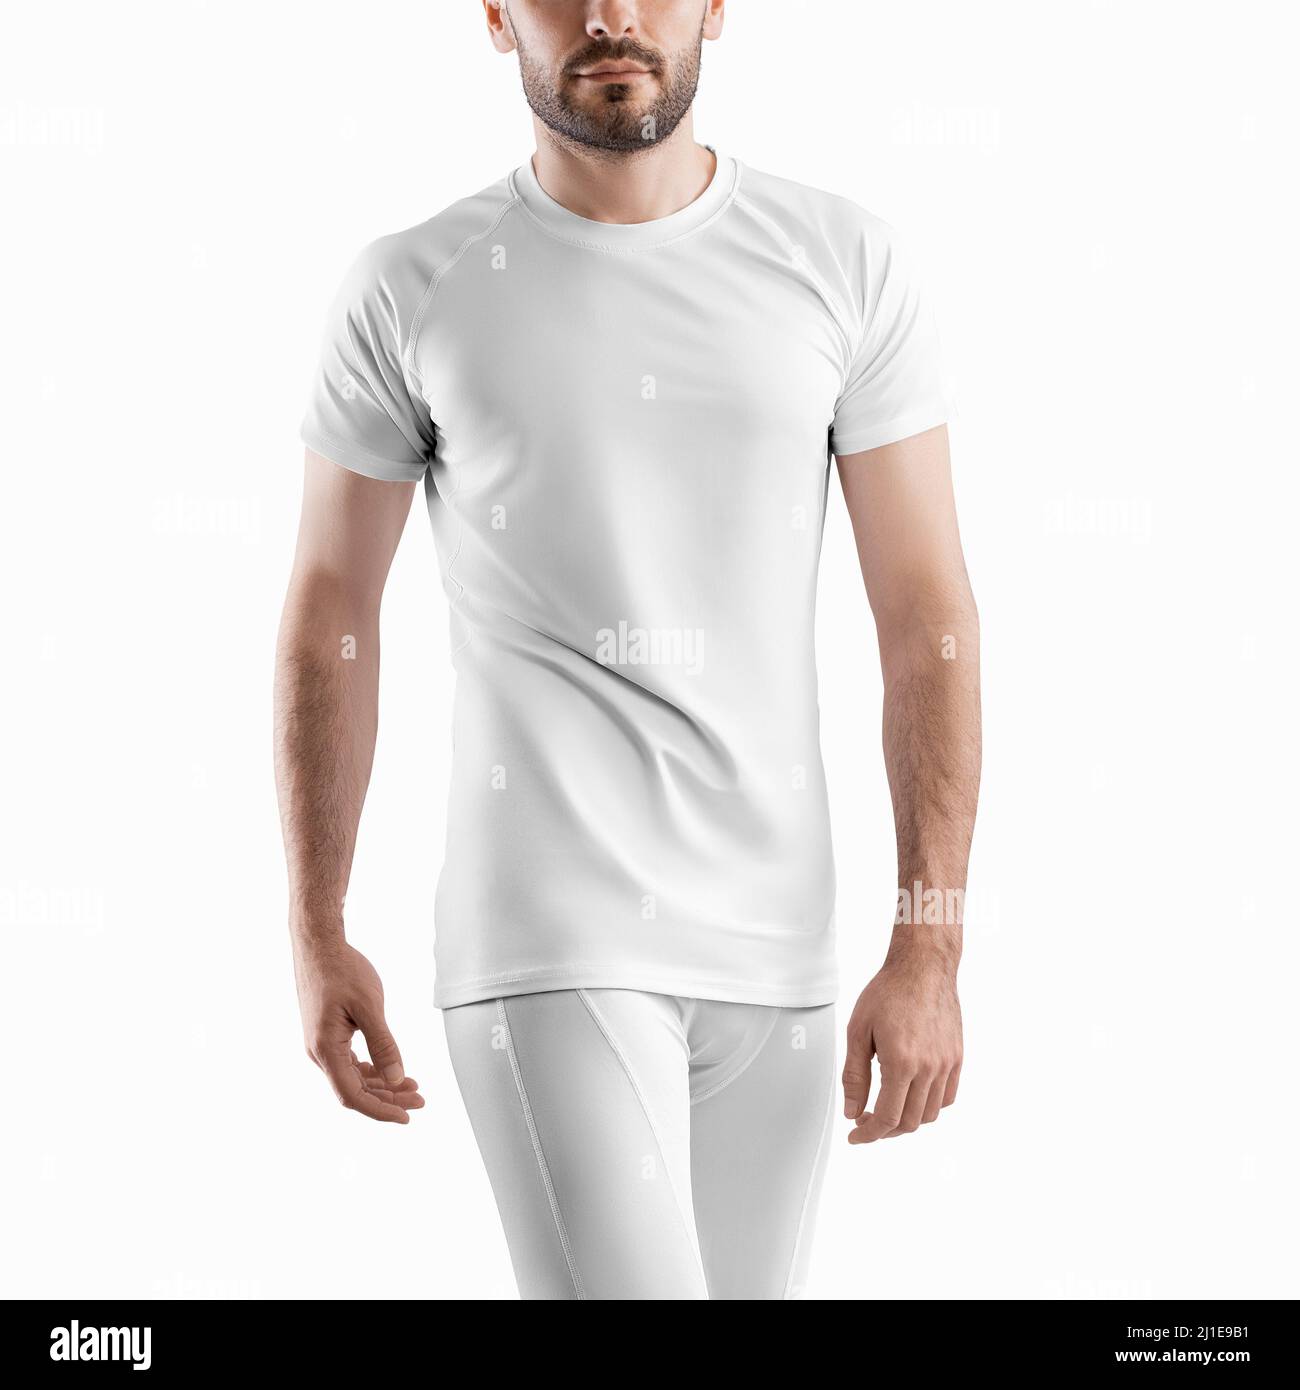 Mockup of sports compression pants and t-shirt on a man. Template of sportswear isolated on background for design presentation. Stock Photo